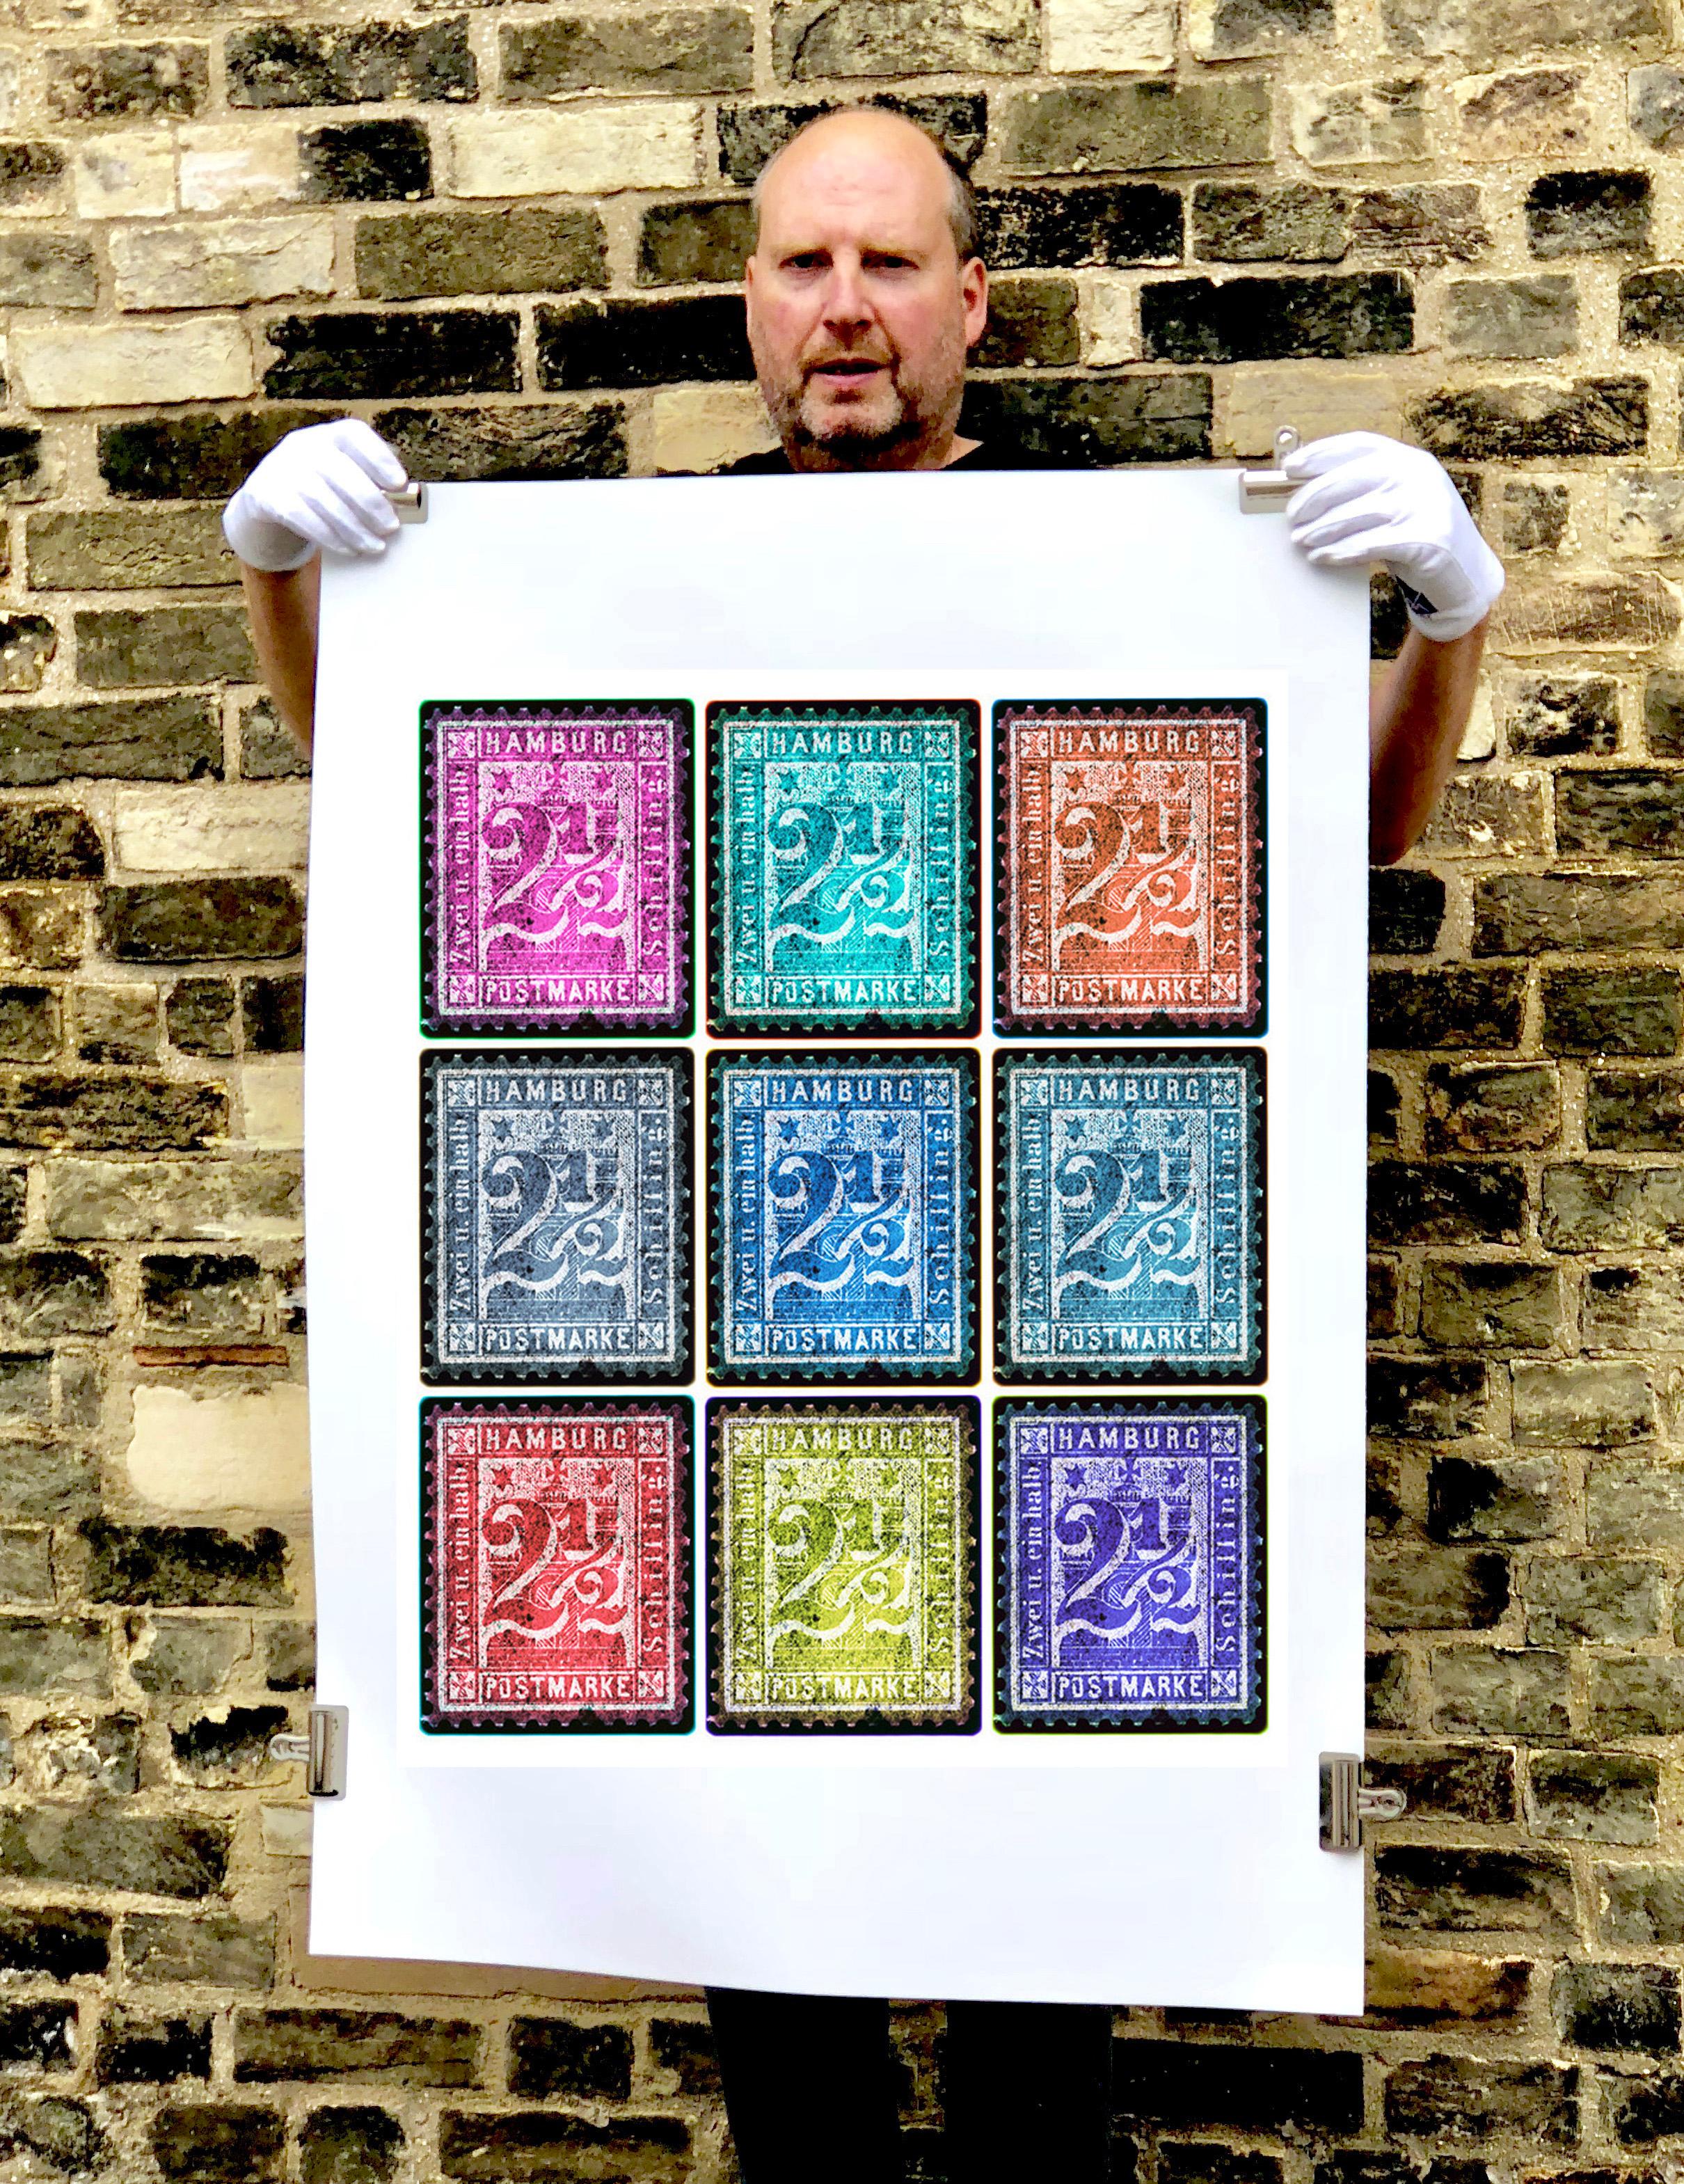 Stamp Collection, 1864 Hamburg (Multi-Color Mosaic German Stamps) - Color Photo - Photograph by Heidler & Heeps